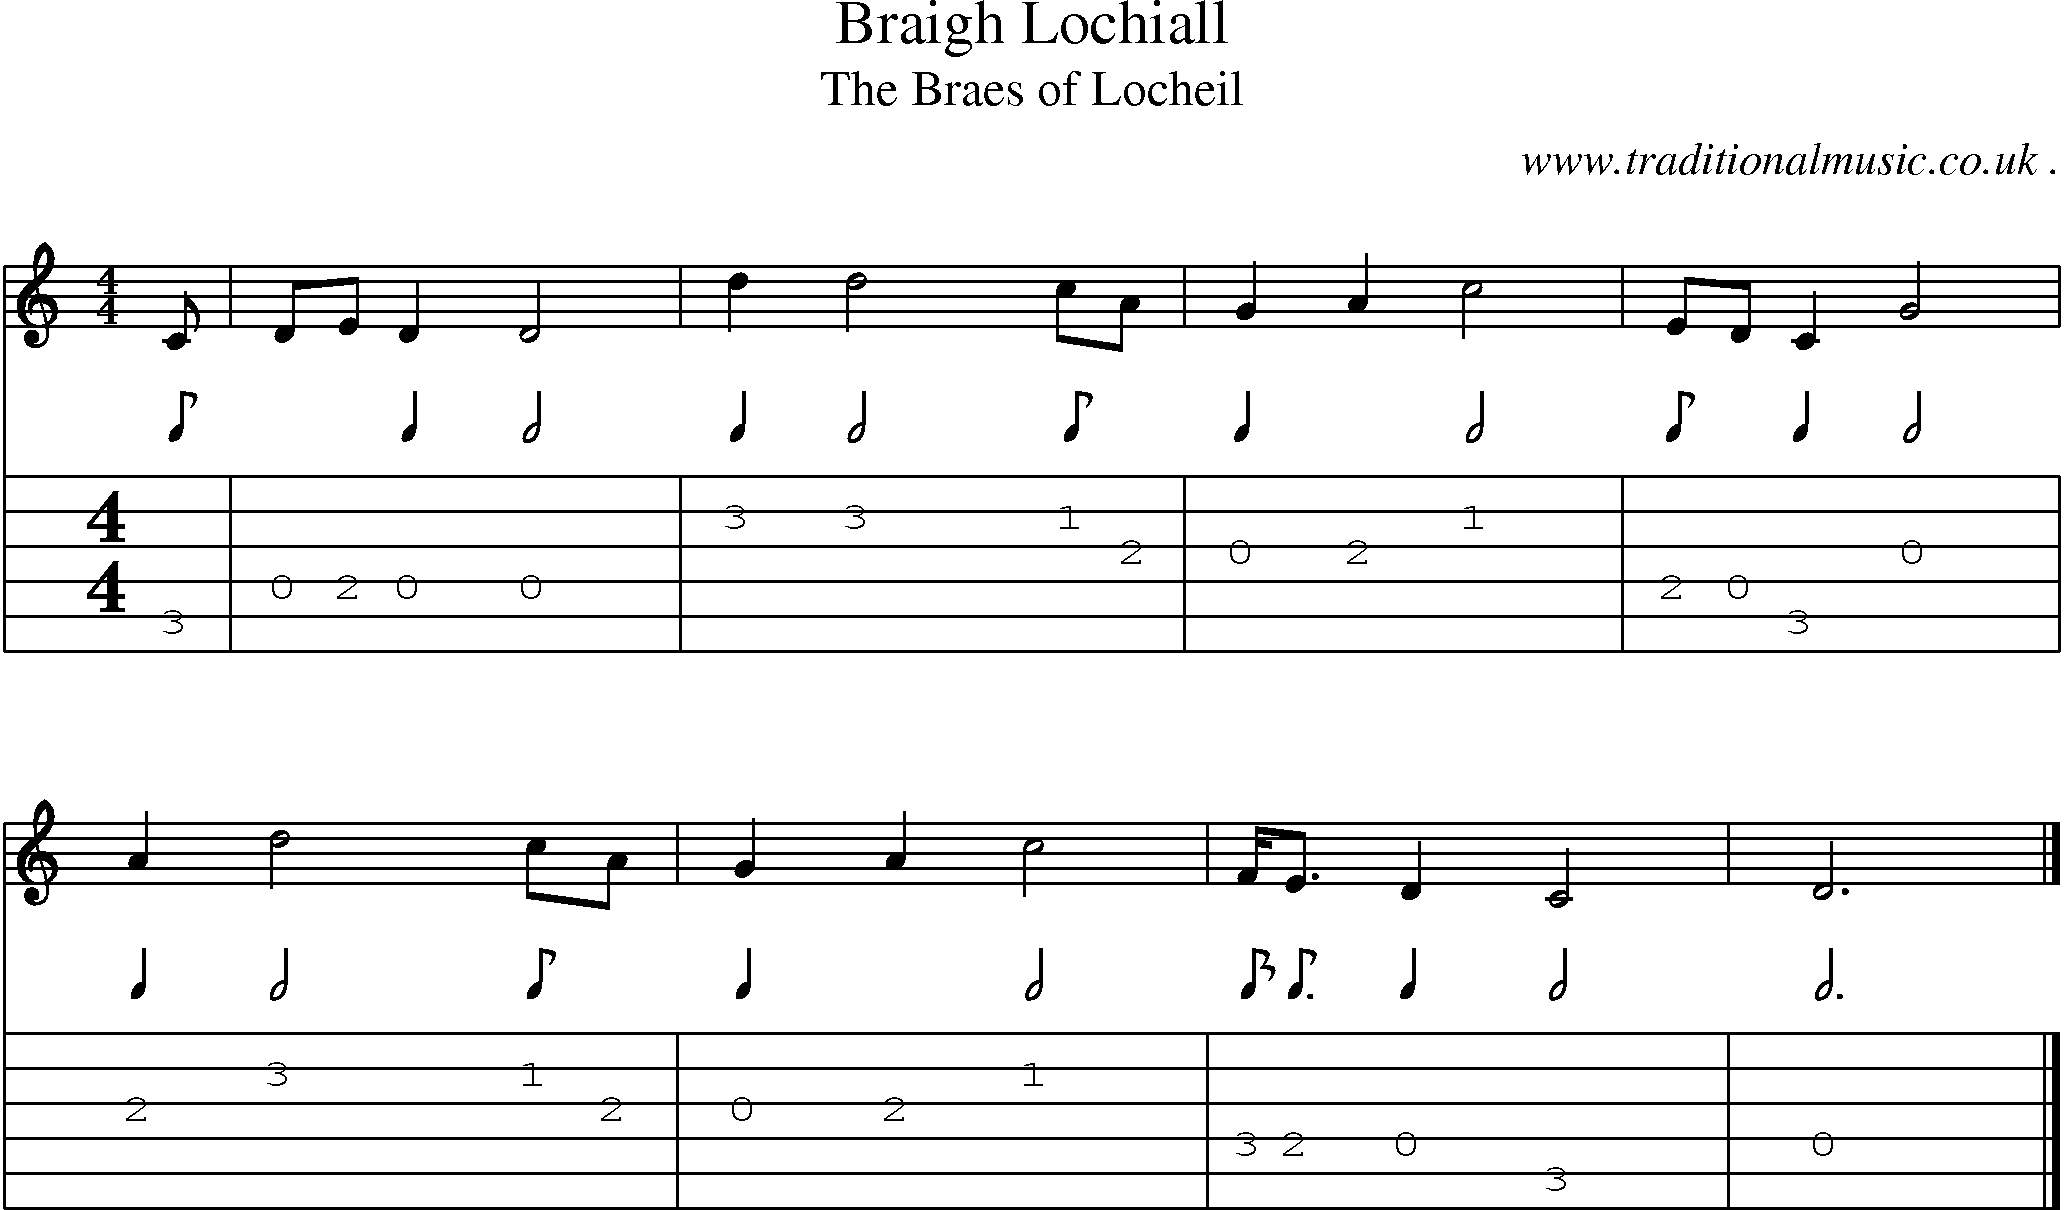 Sheet-music  score, Chords and Guitar Tabs for Braigh Lochiall